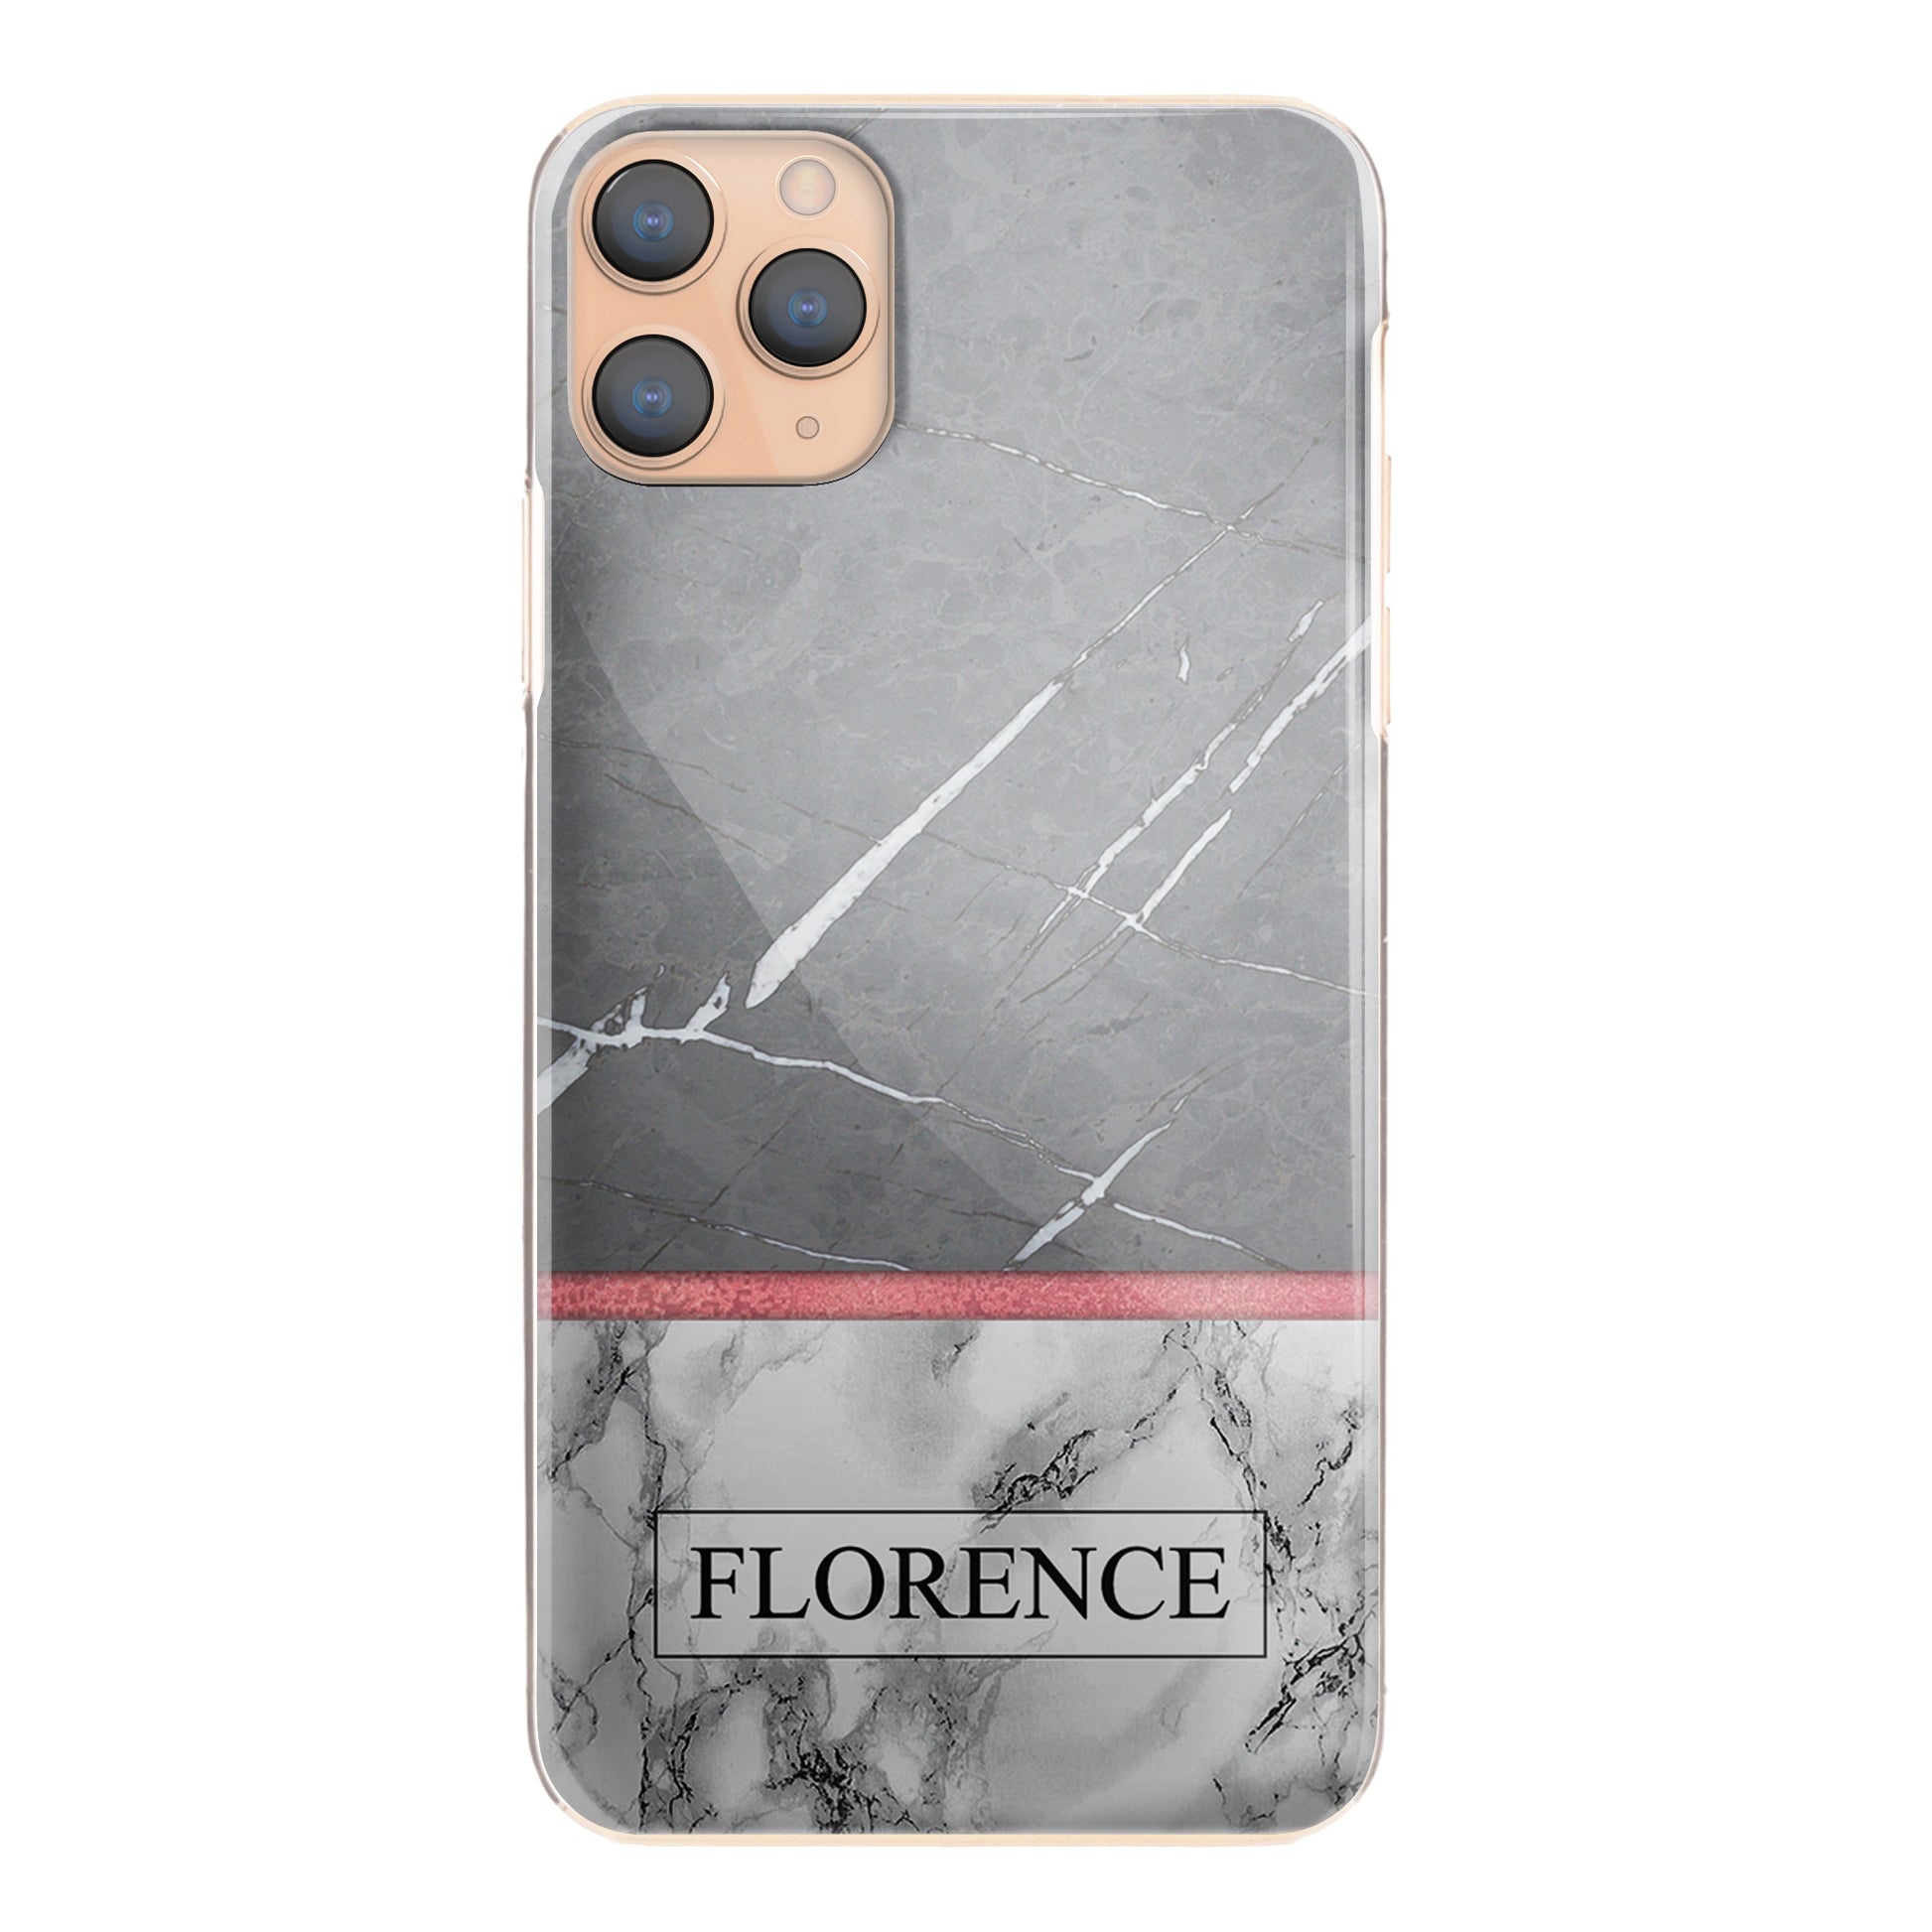 Personalised LG Phone Hard Case with Classy Text on Stylish Dual Marble